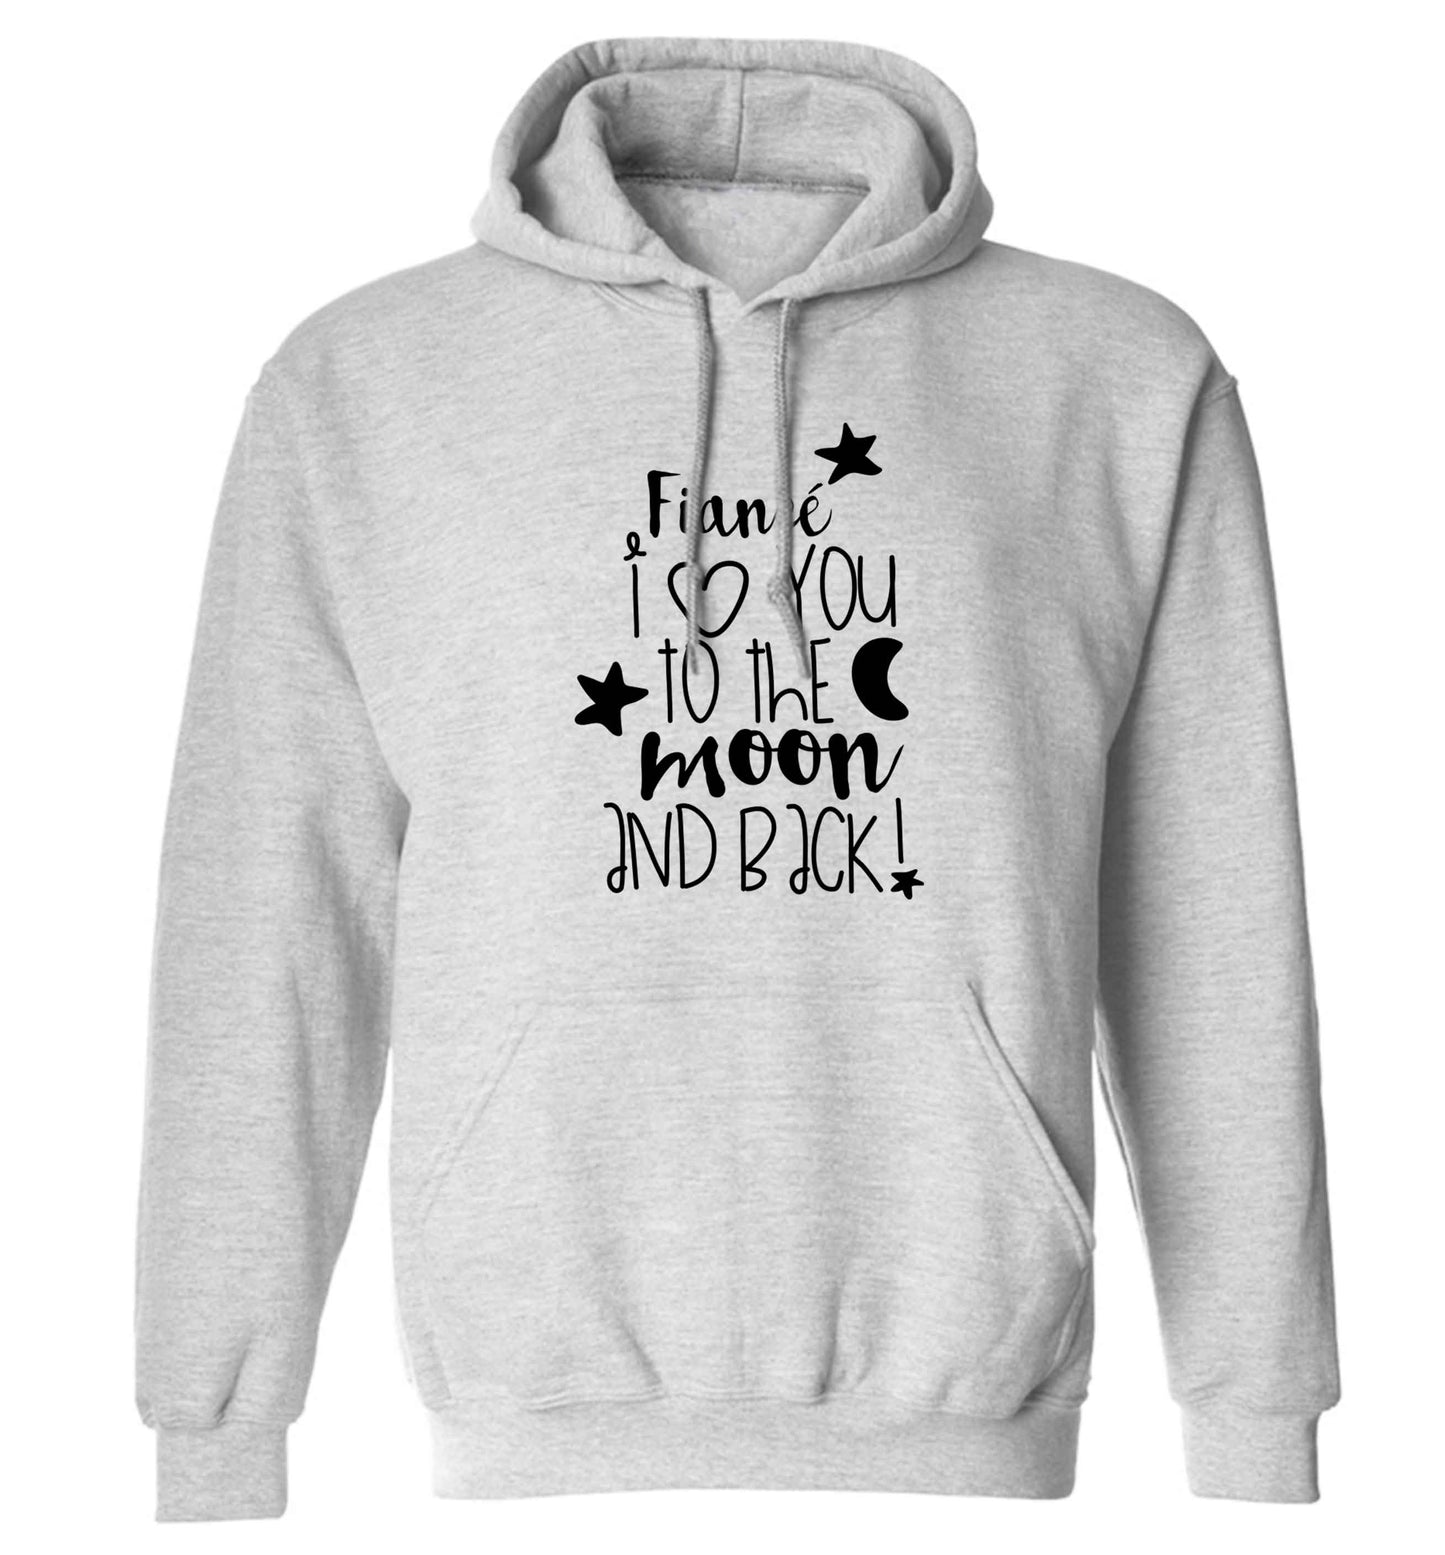 Fianc√© I love you to the moon and back adults unisex grey hoodie 2XL